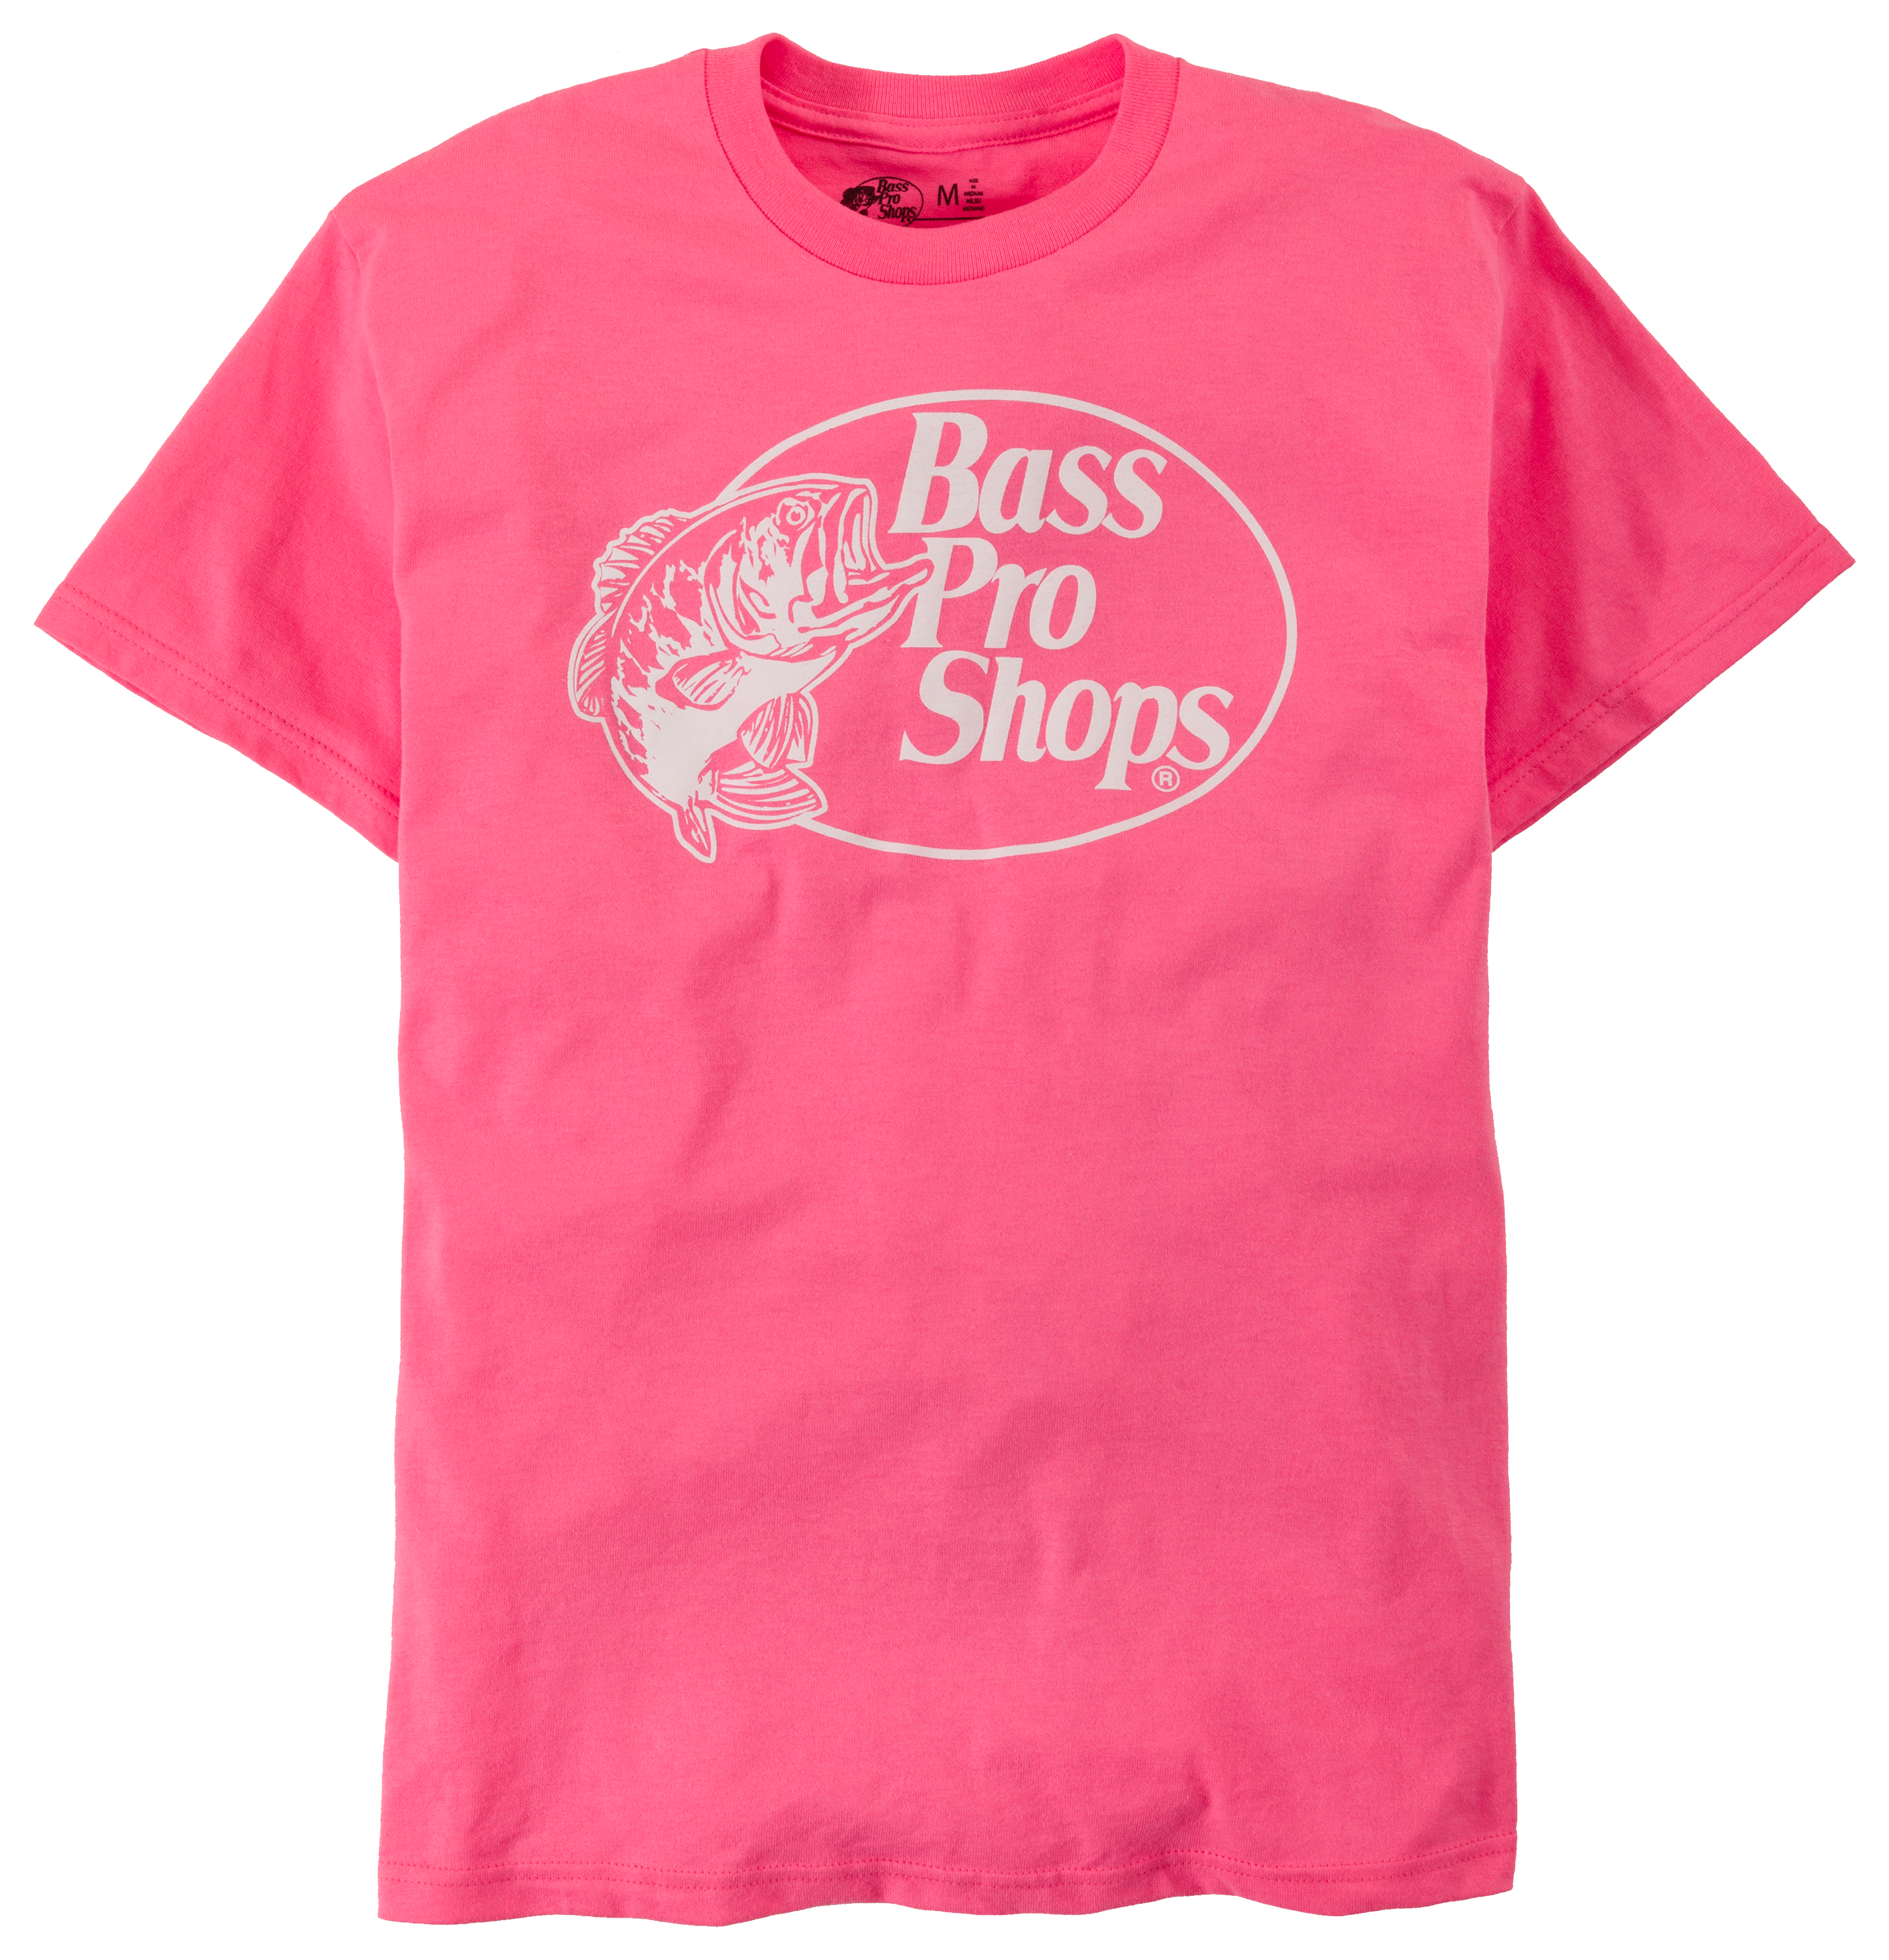 Bass Pro Shops High Visibility Logo T-Shirt for Ladies - Short